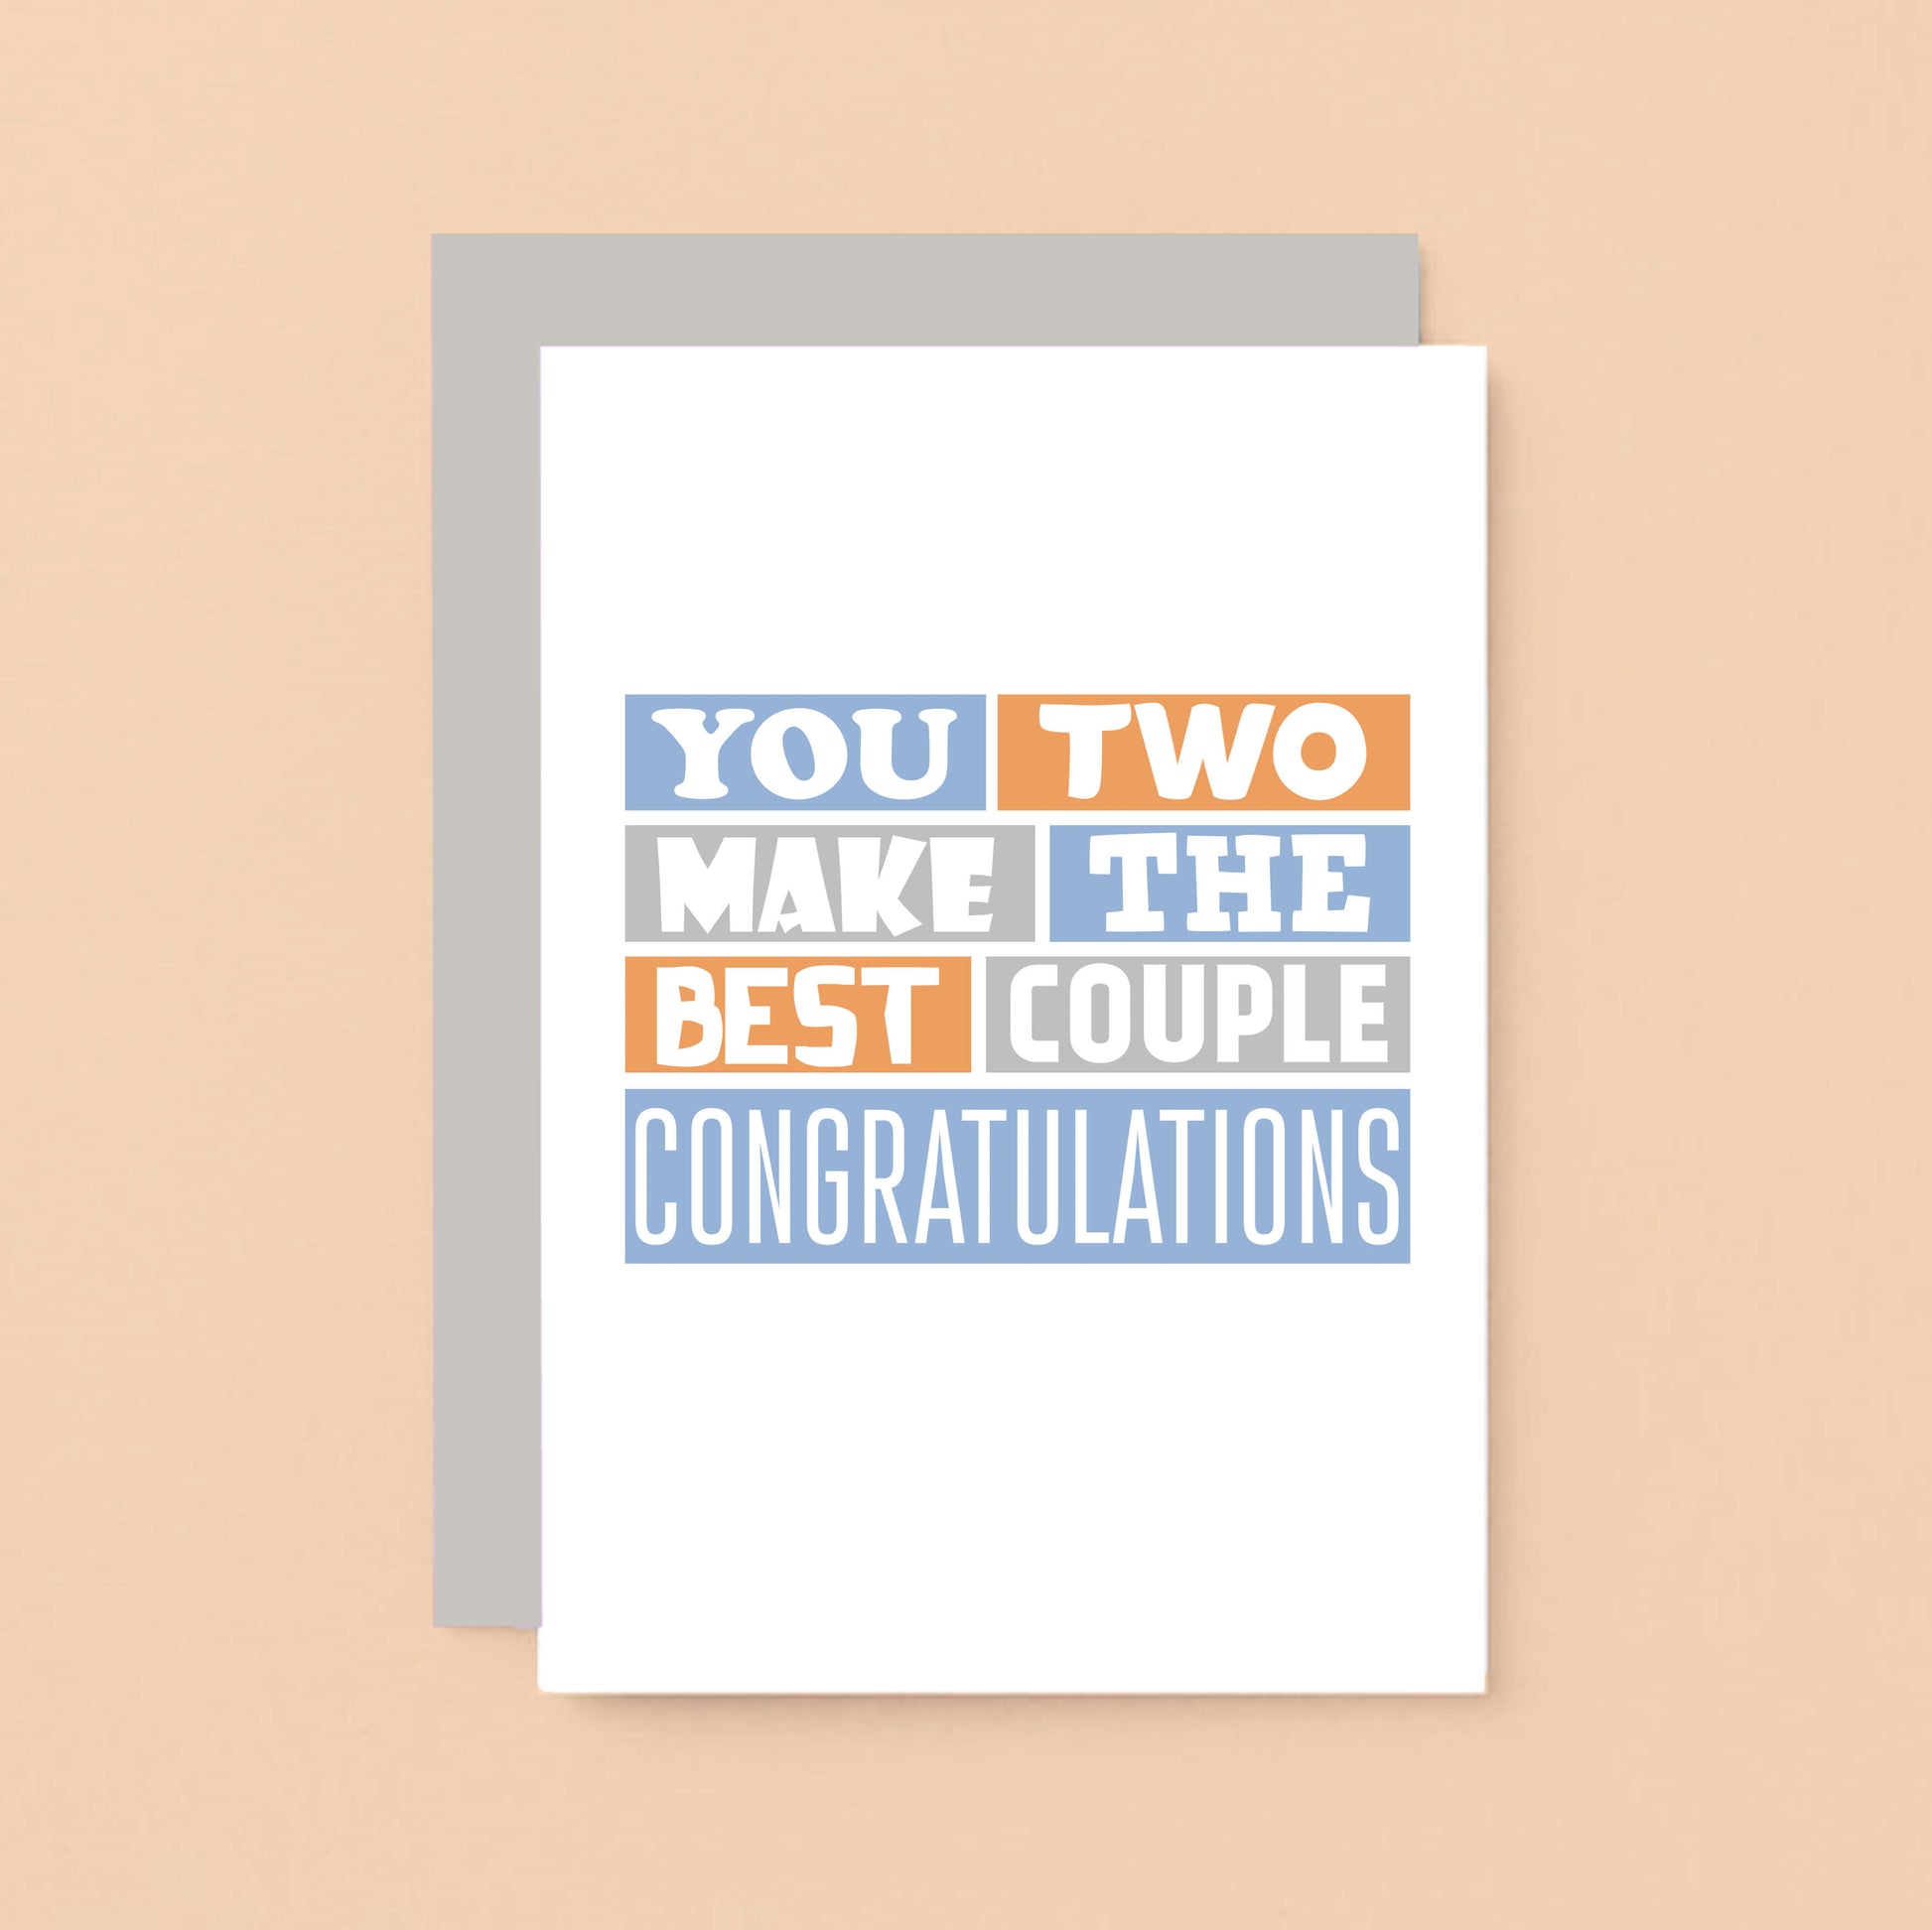 Congratulations Card by SixElevenCreations. Reads You two make the best couple Congratulations. Product Code SE0272A6